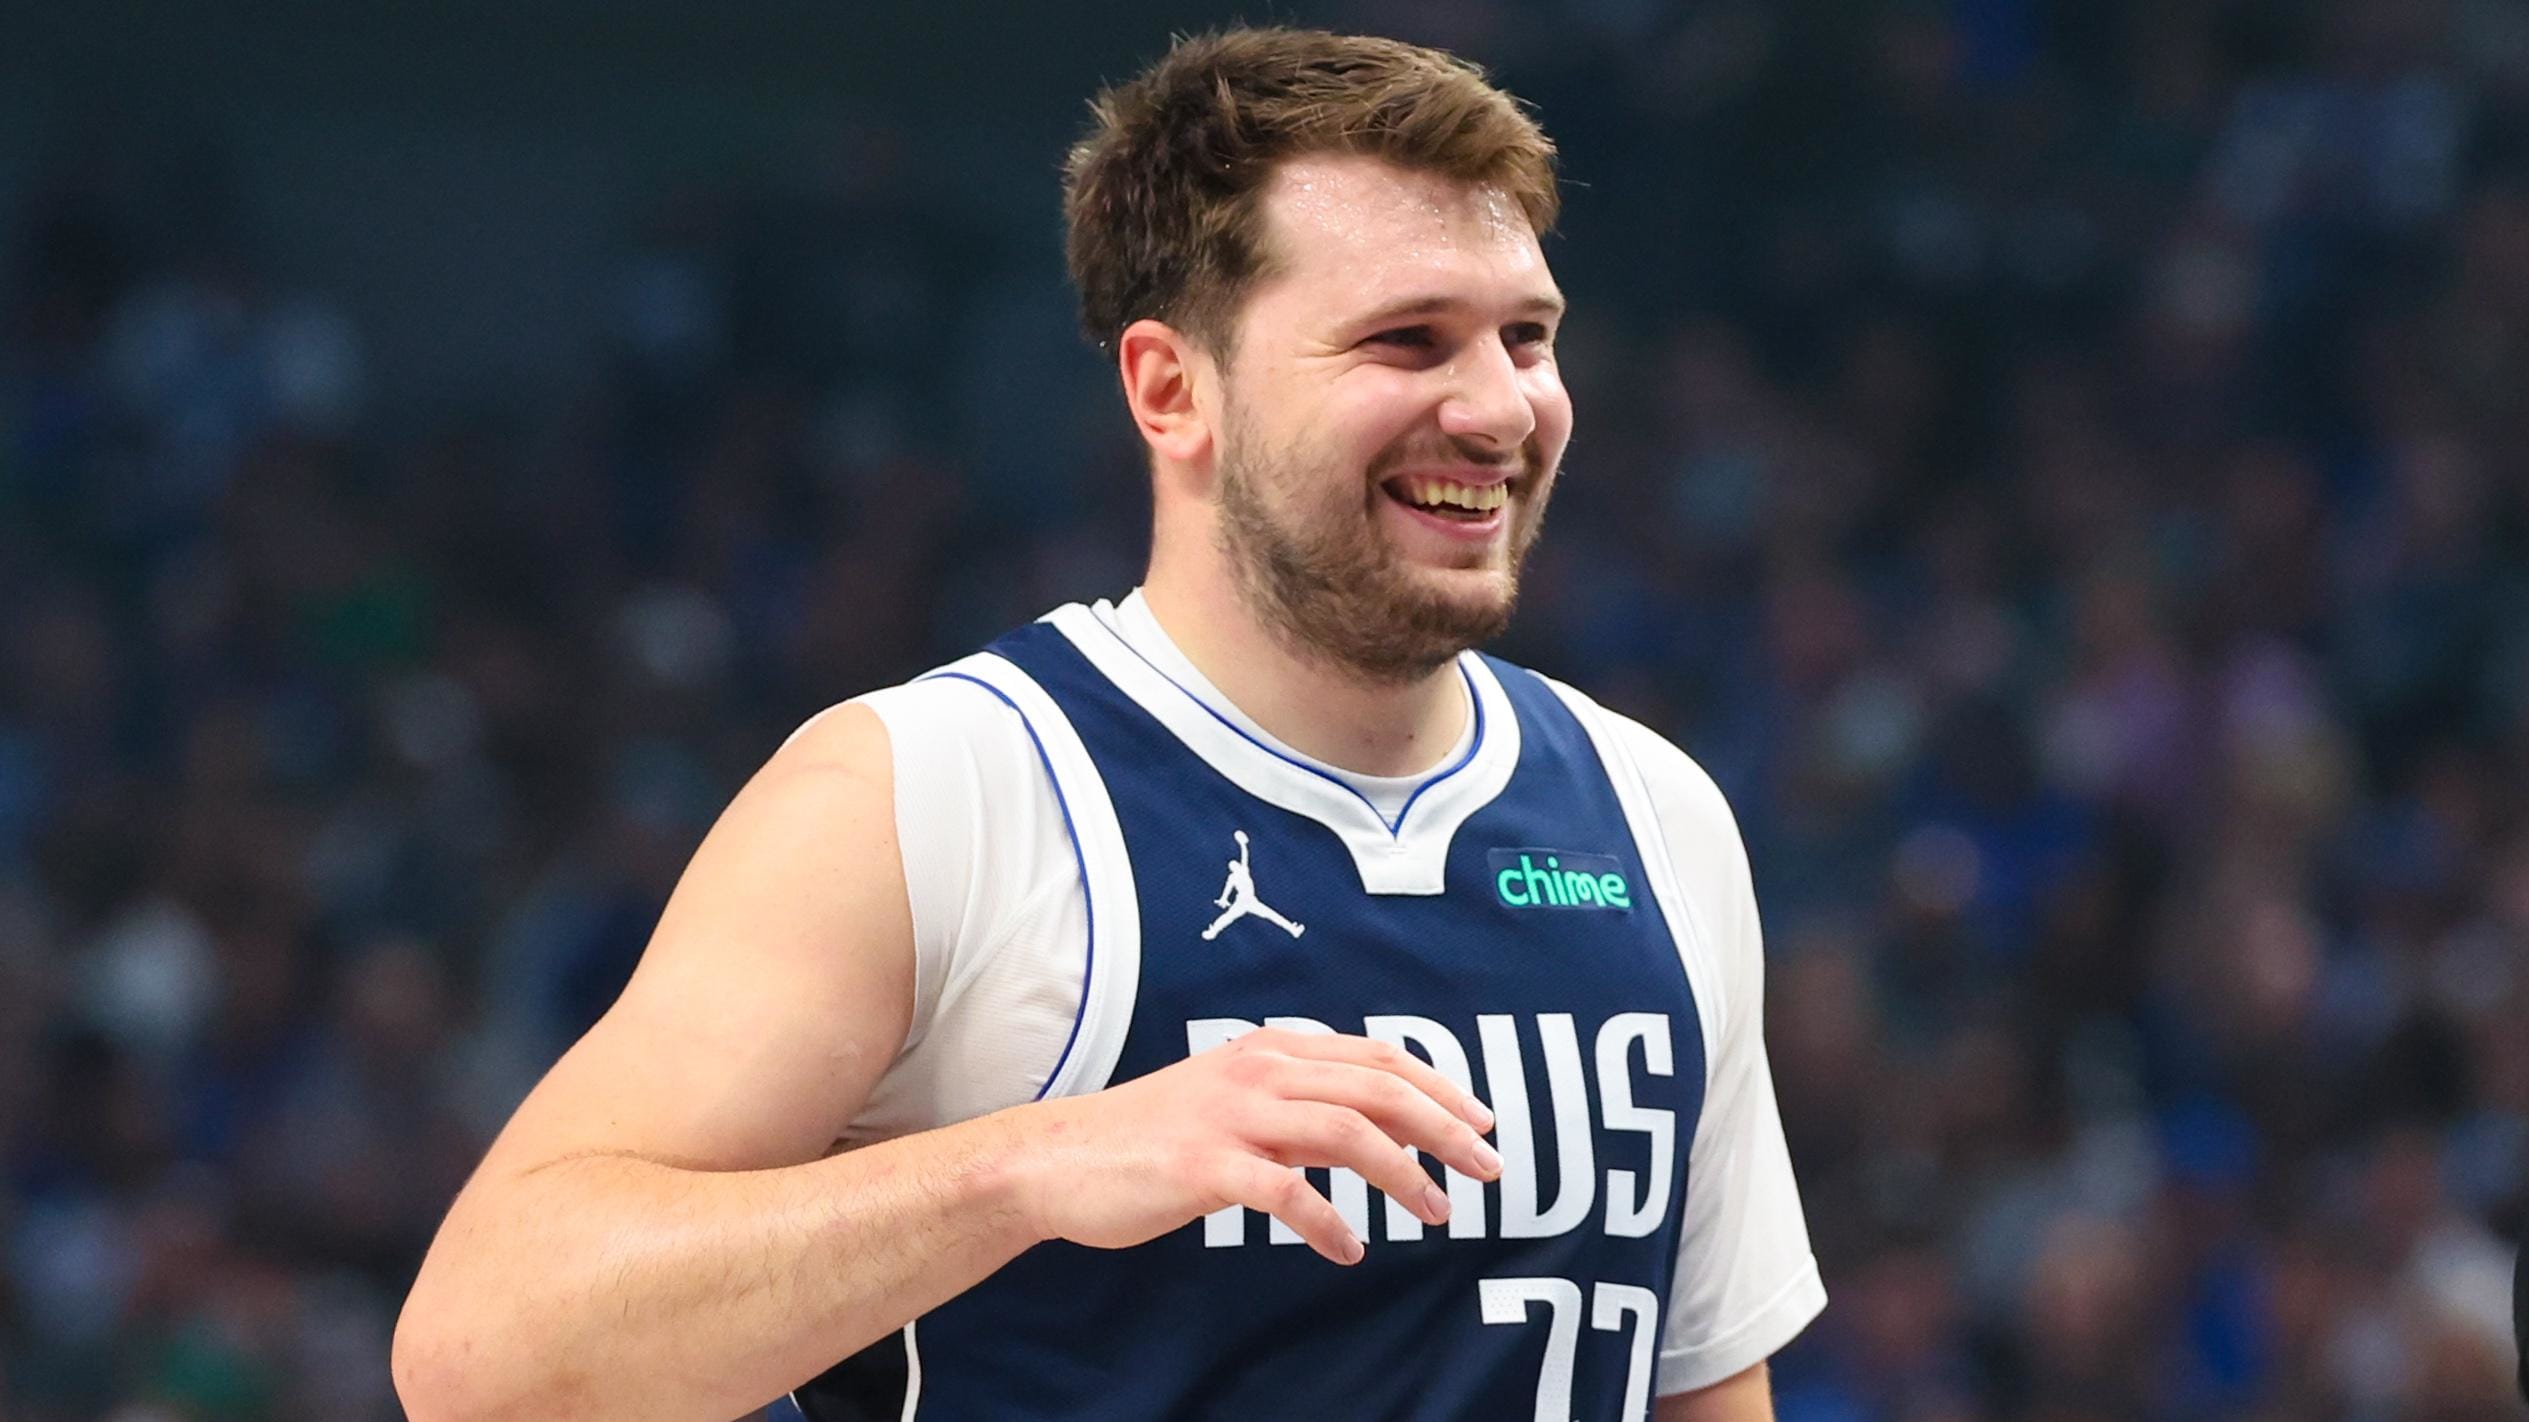 Dallas Mavericks vs. Clippers Game 5: Luka Doncic’s Knee Injury Update & Team’s Standings